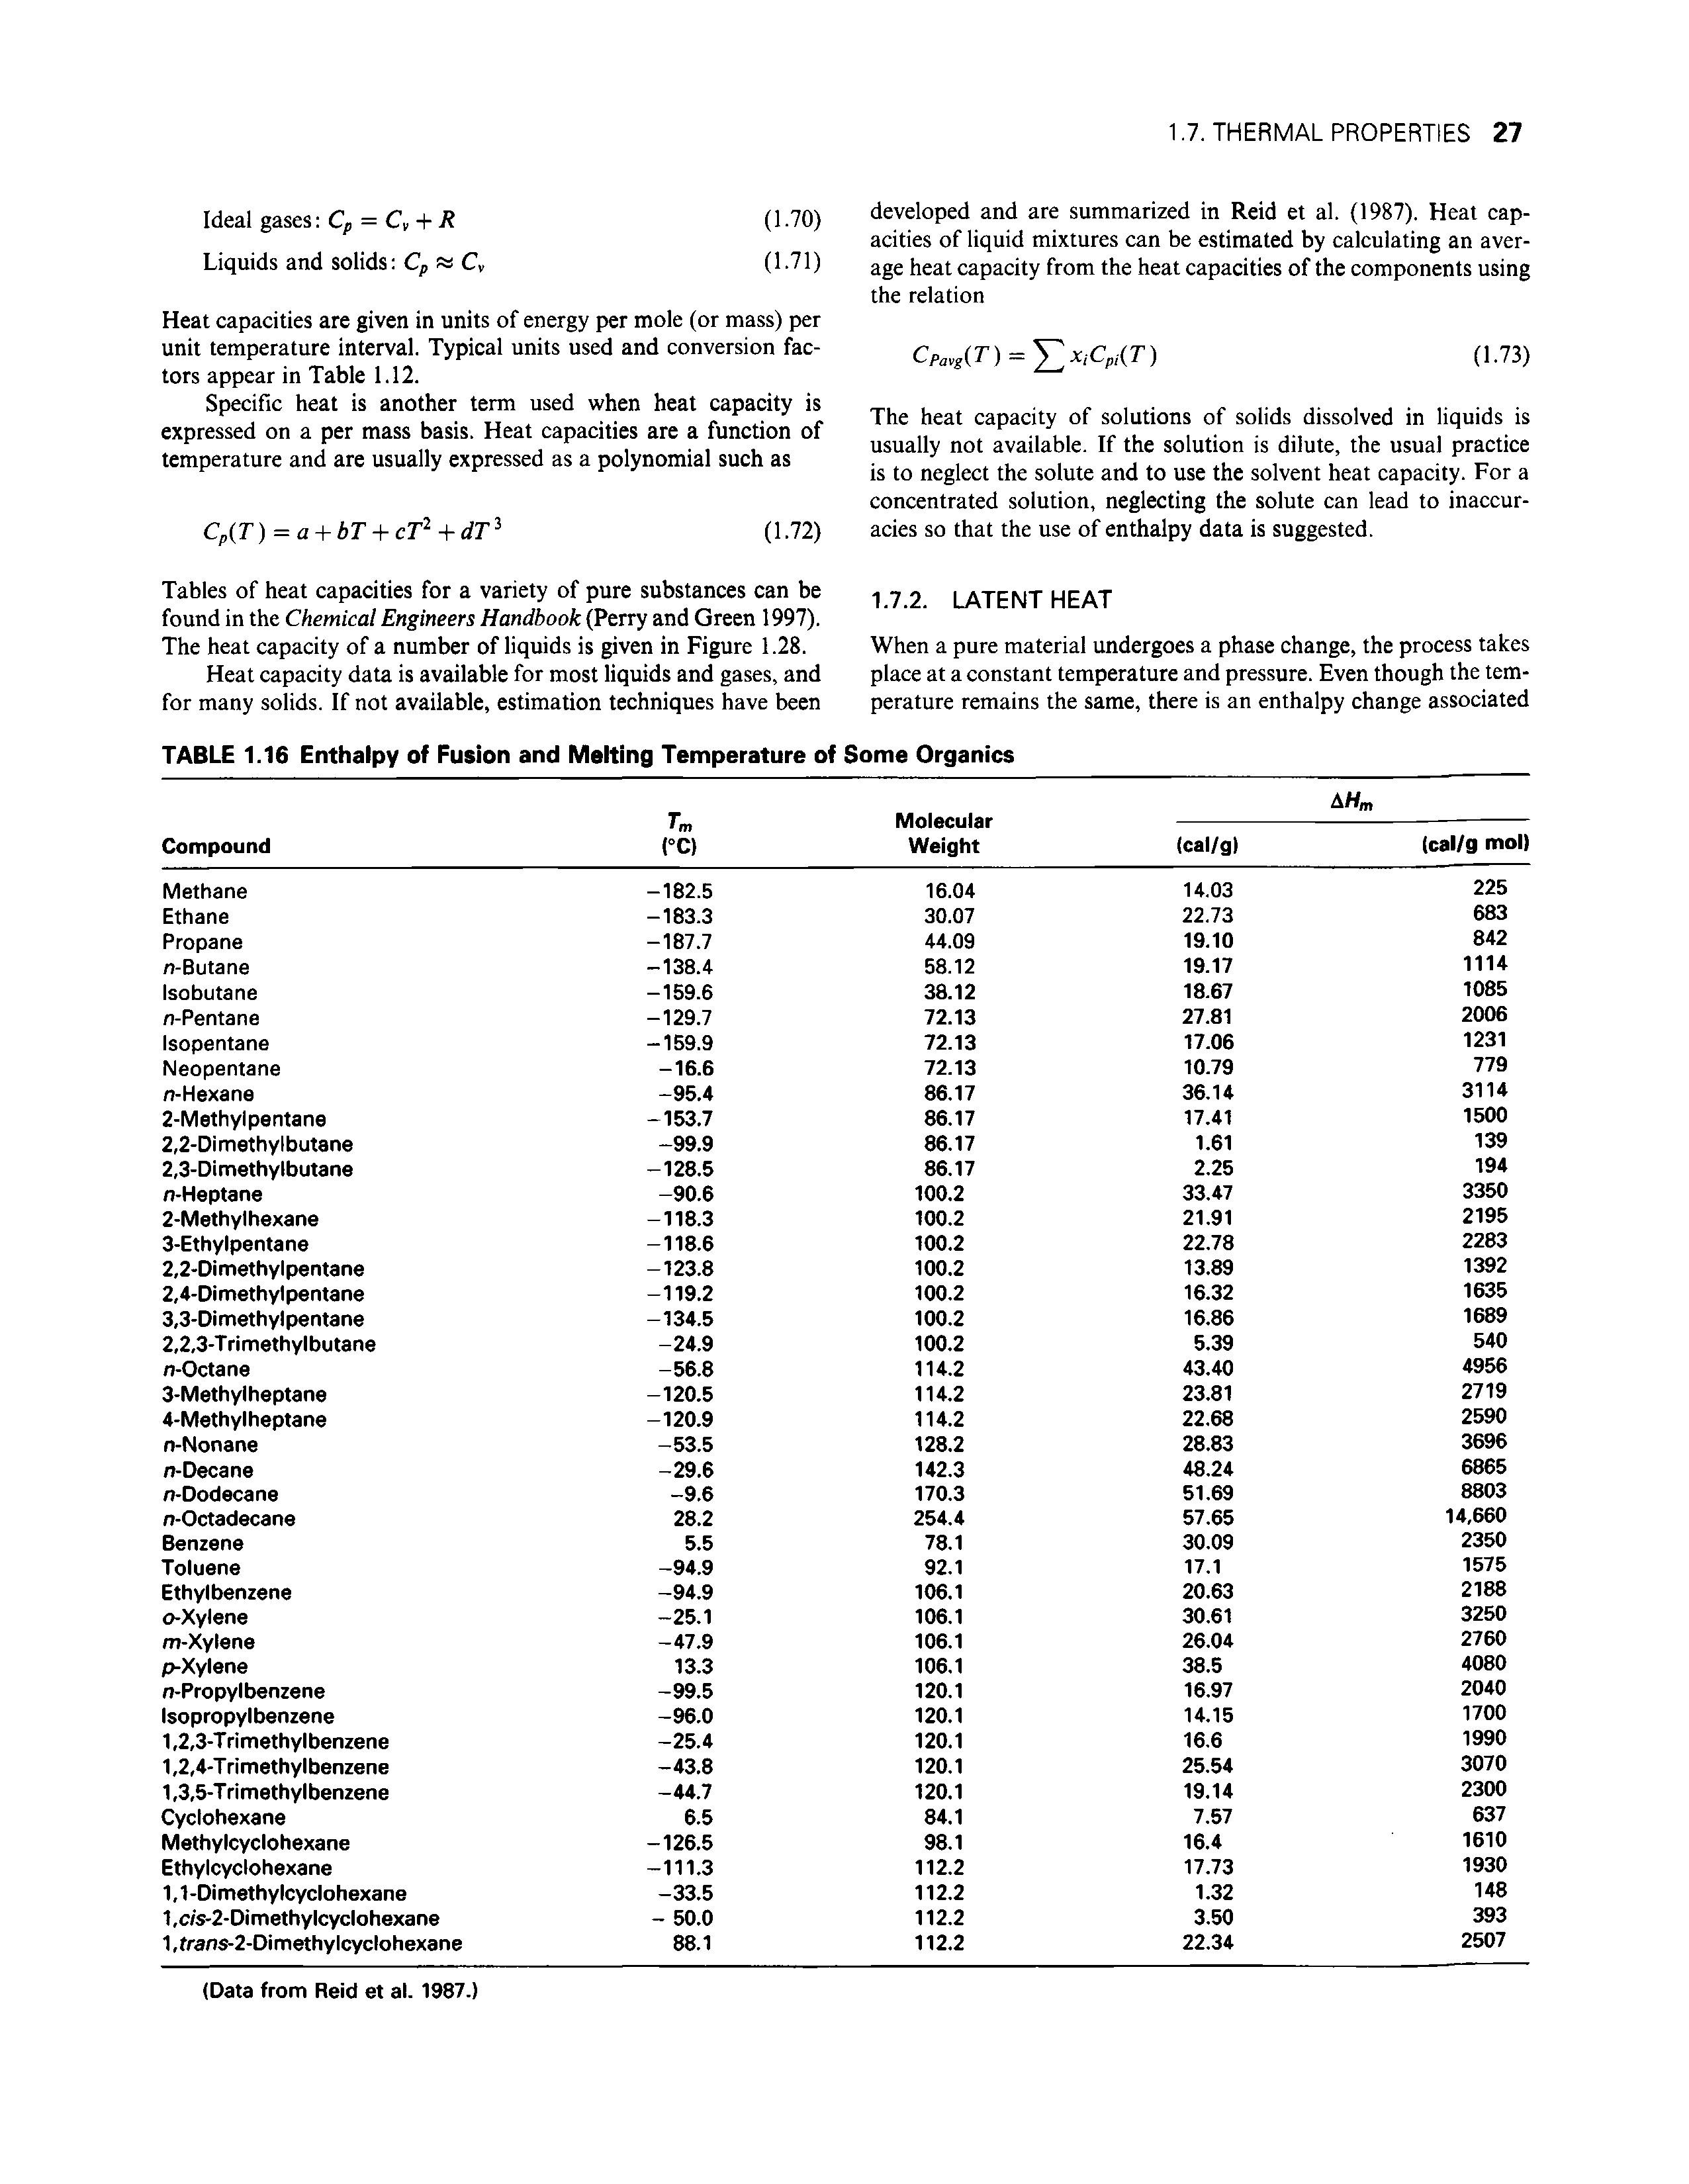 Tables of heat capacities for a variety of pure substances can be found in the Chemical Engineers Handbook (Perry and Green 1997). The heat capacity of a number of liquids is given in Figure 1.28.